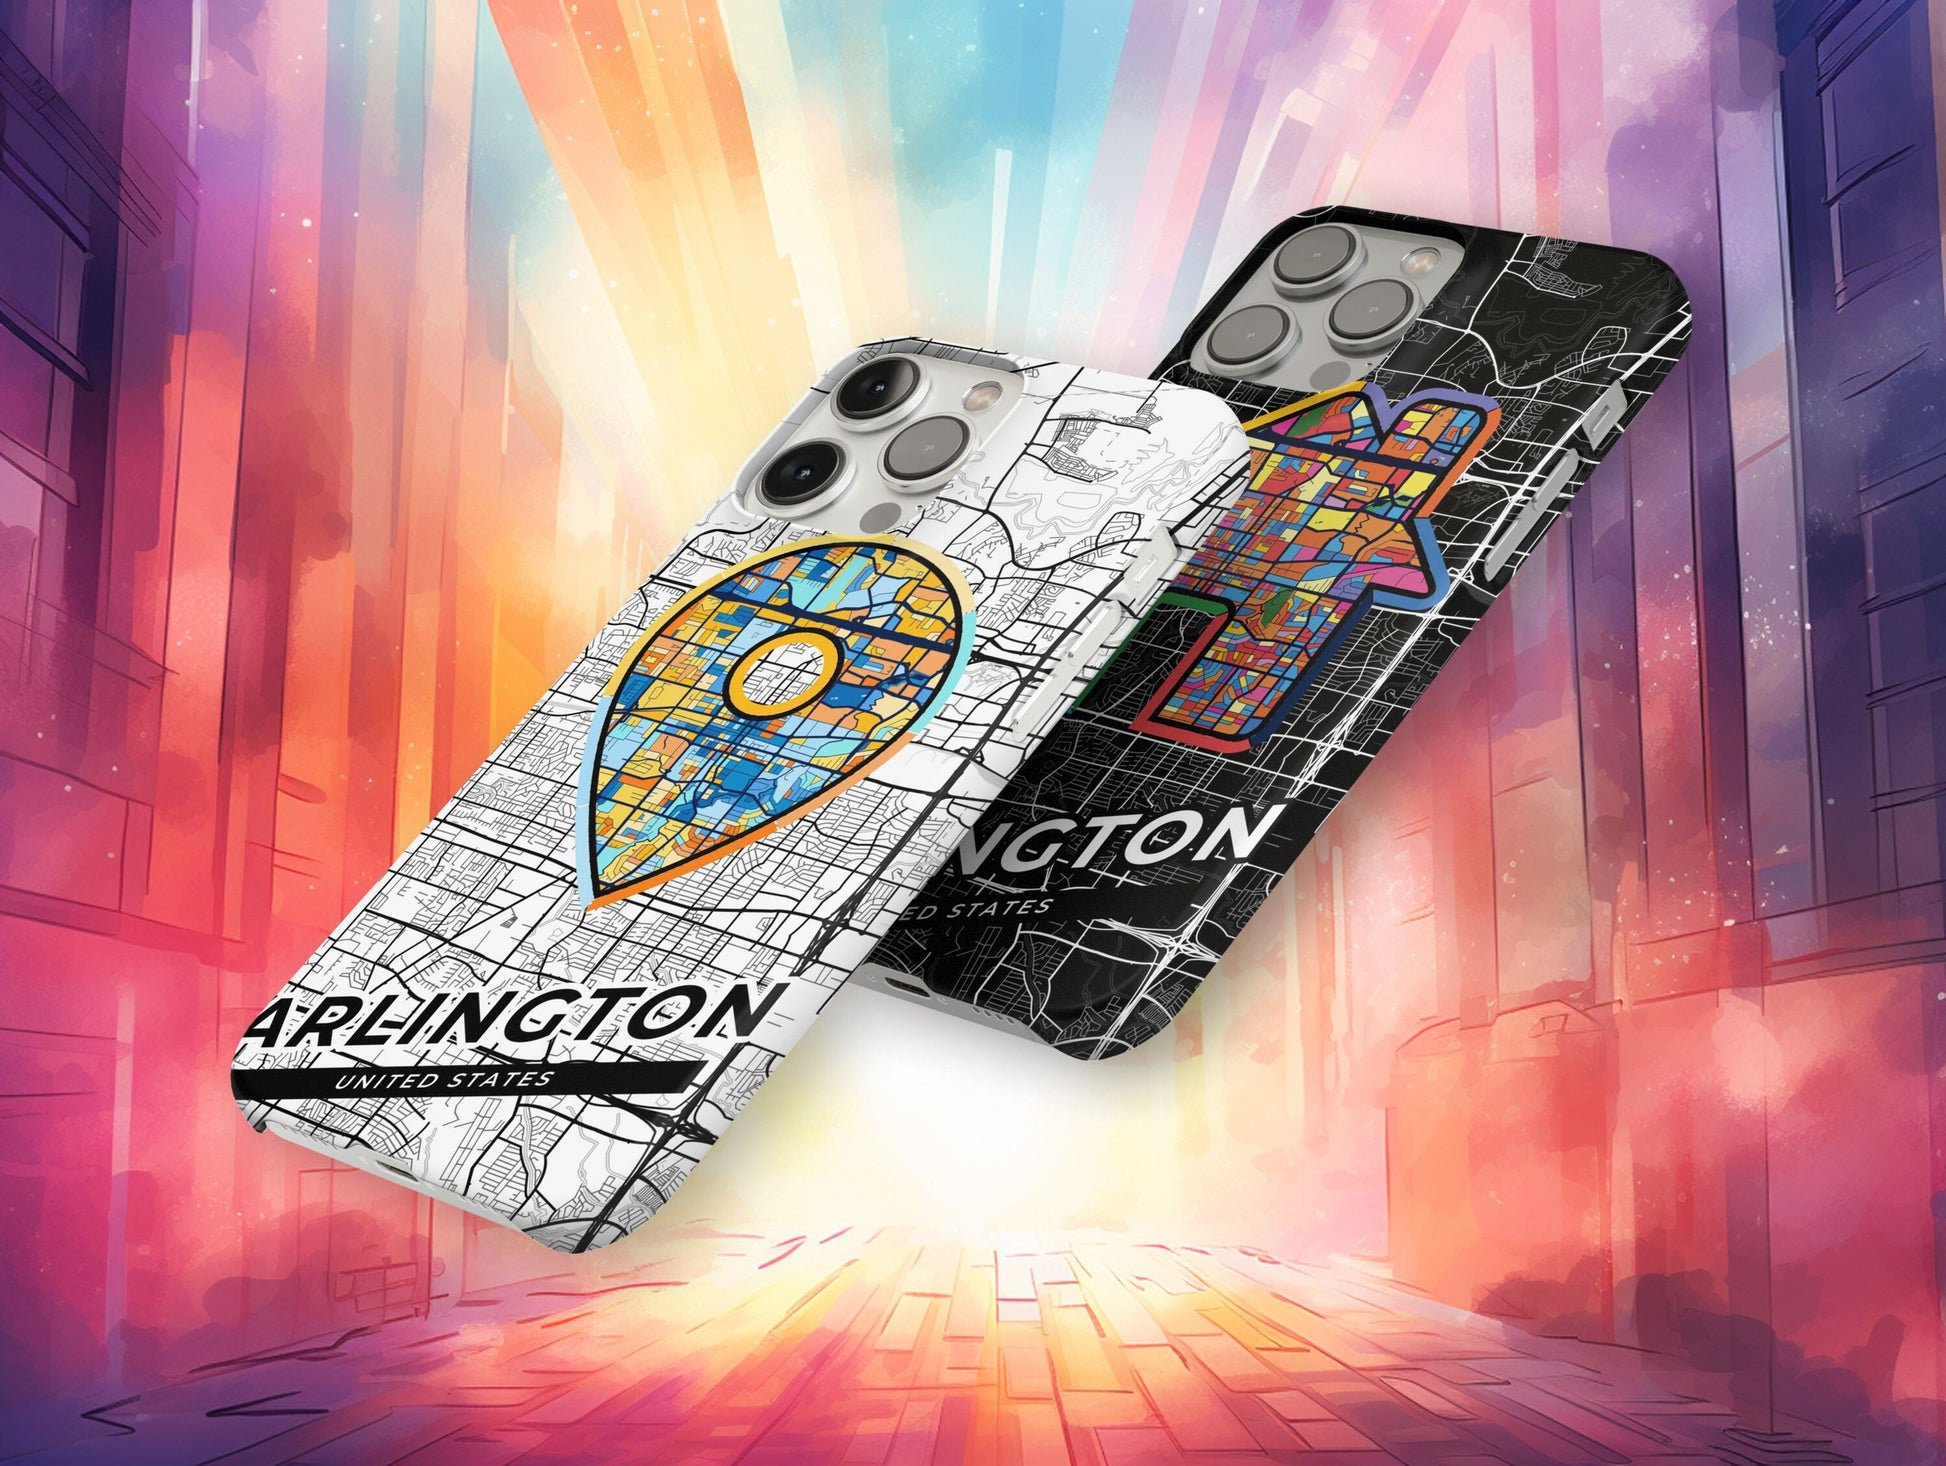 Arlington Texas slim phone case with colorful icon. Birthday, wedding or housewarming gift. Couple match cases.